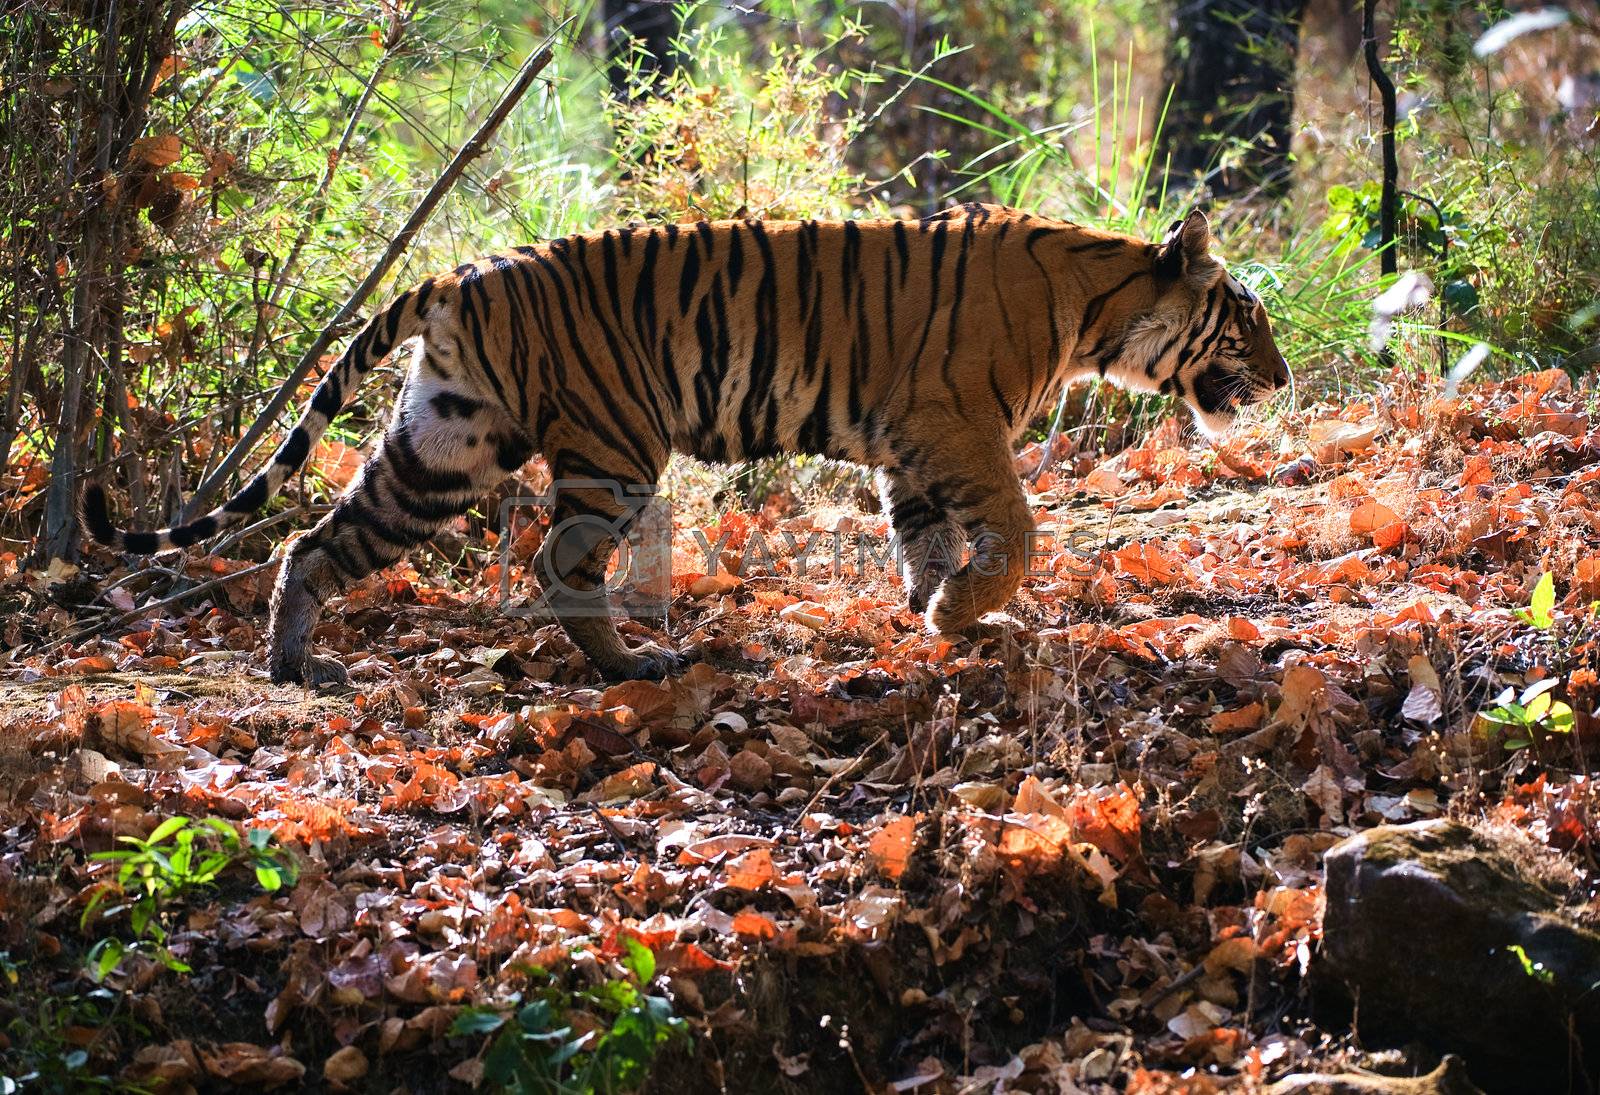 Royalty free image of Royal Bengal tiger by SURZ